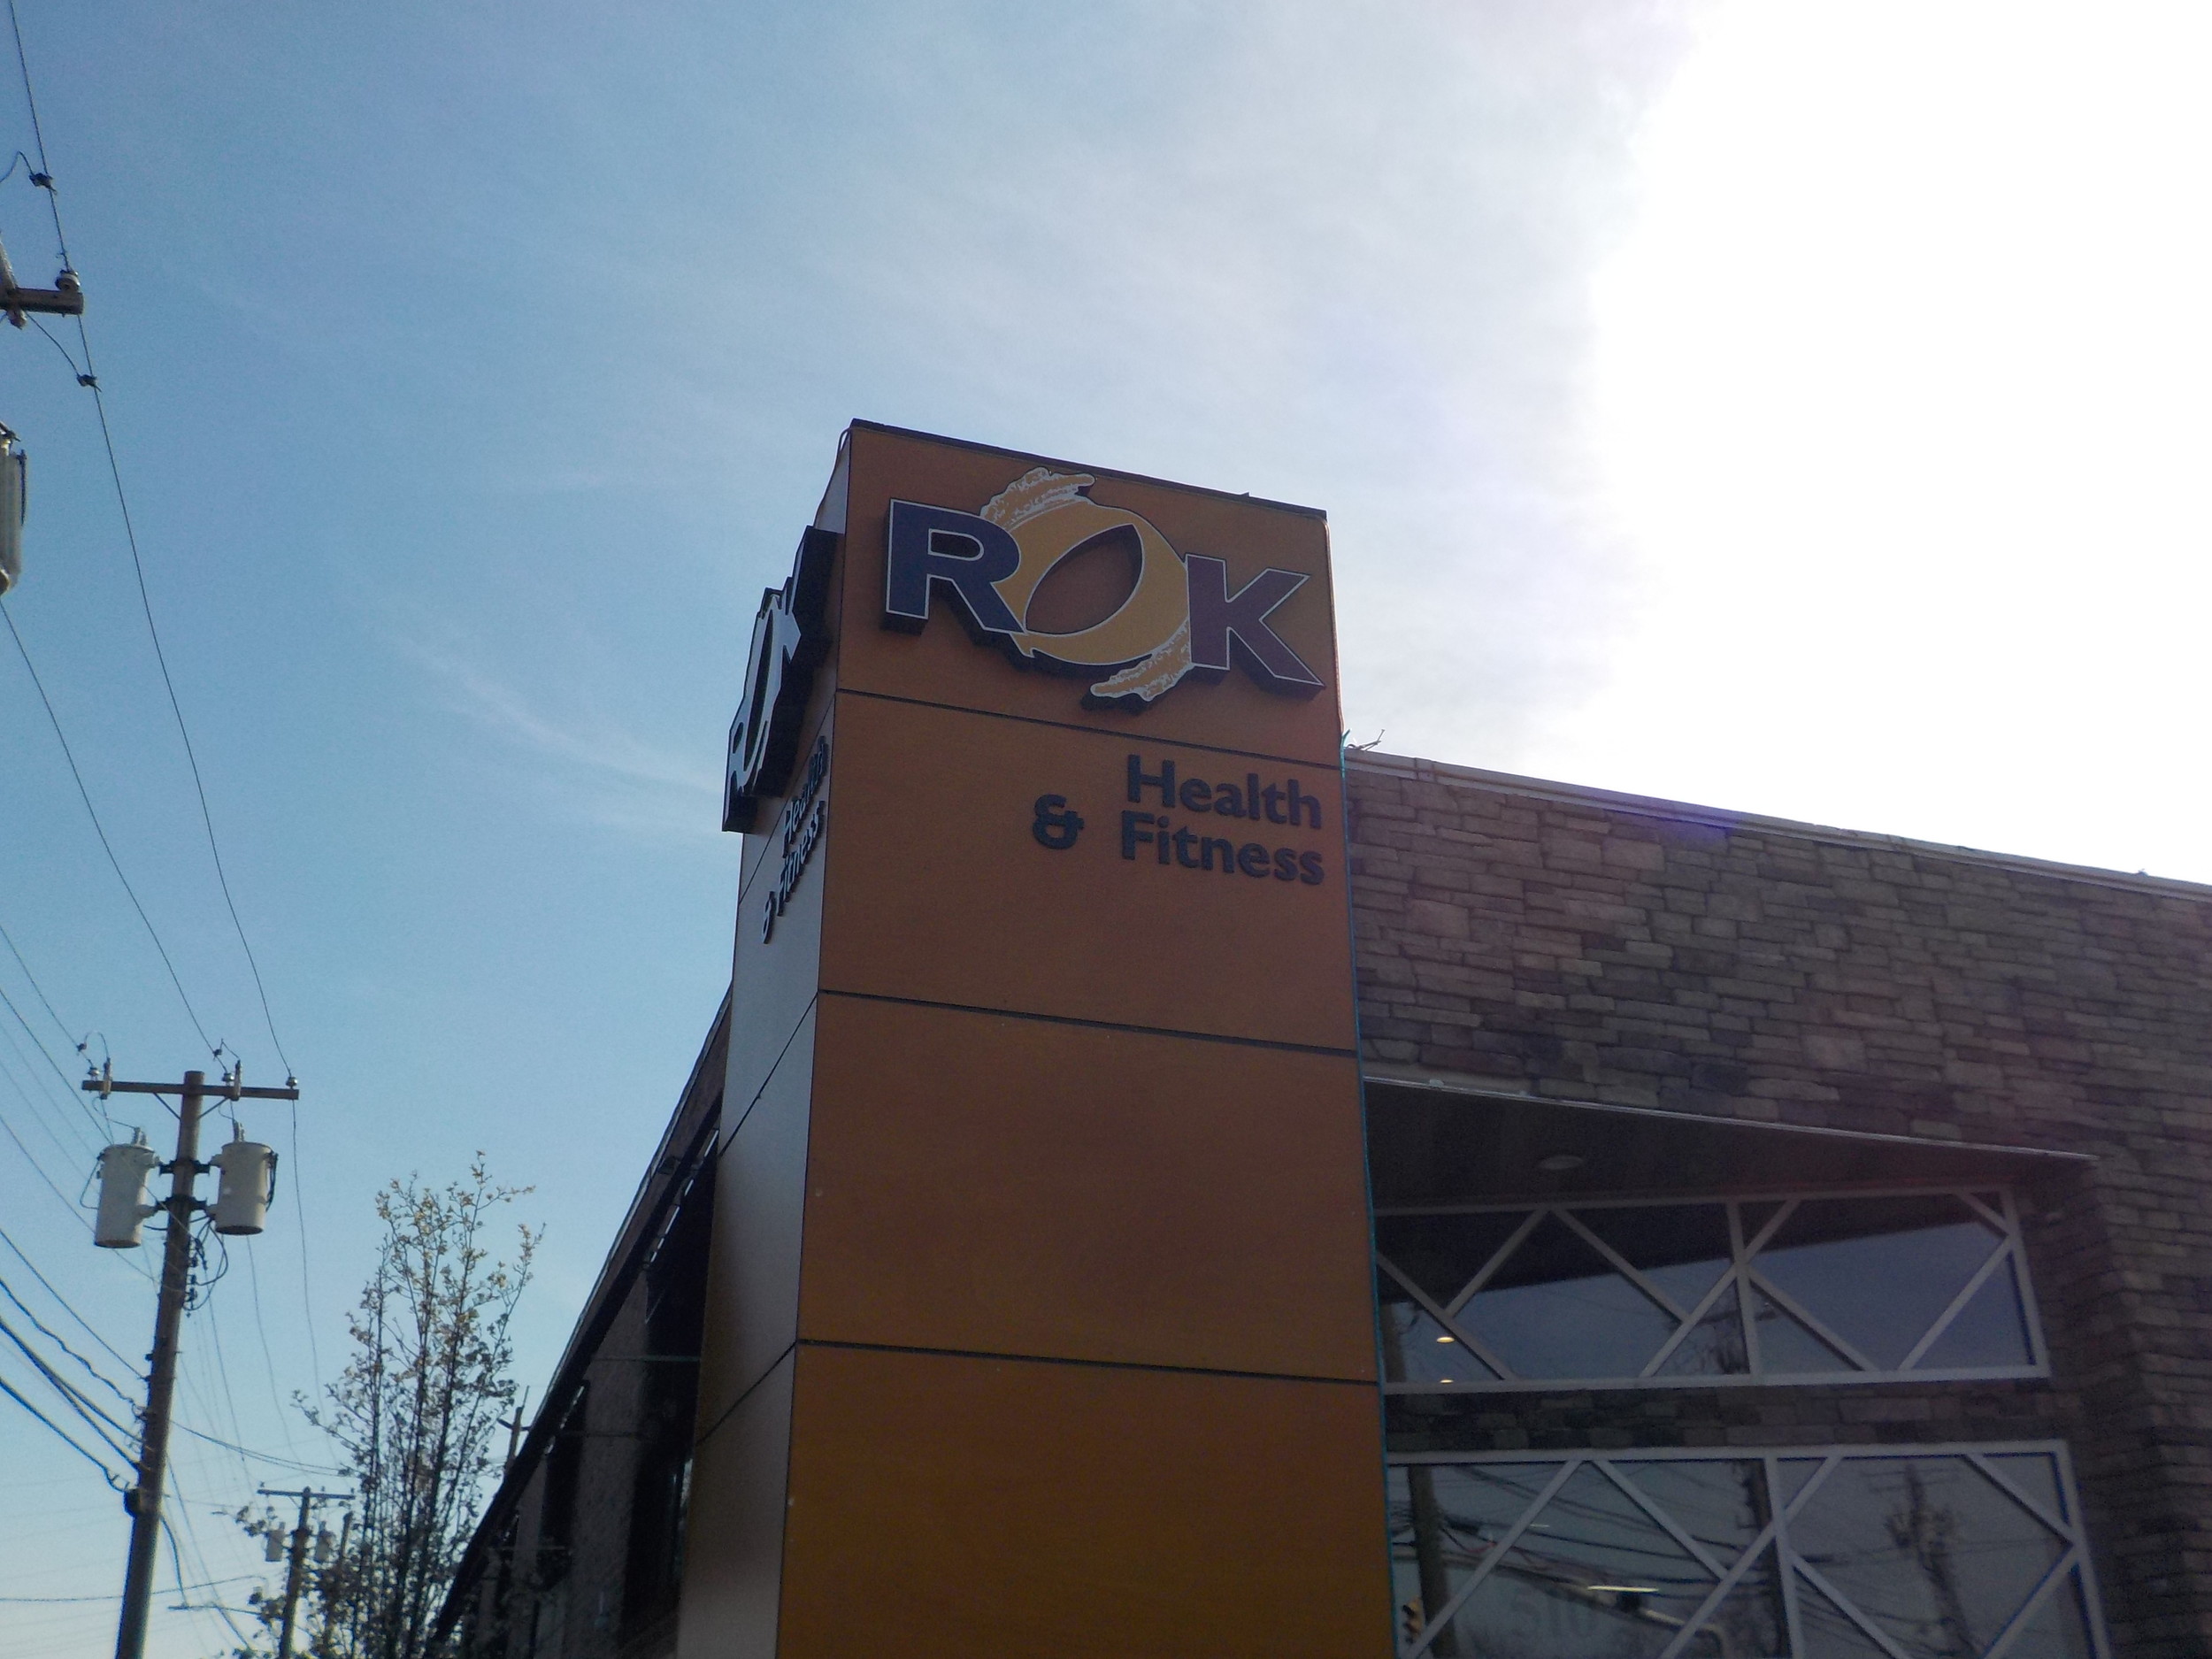 ROK Health & Fitness has been a part of the East Rockaway community ever since it opened its doors for the first time in January 2012.